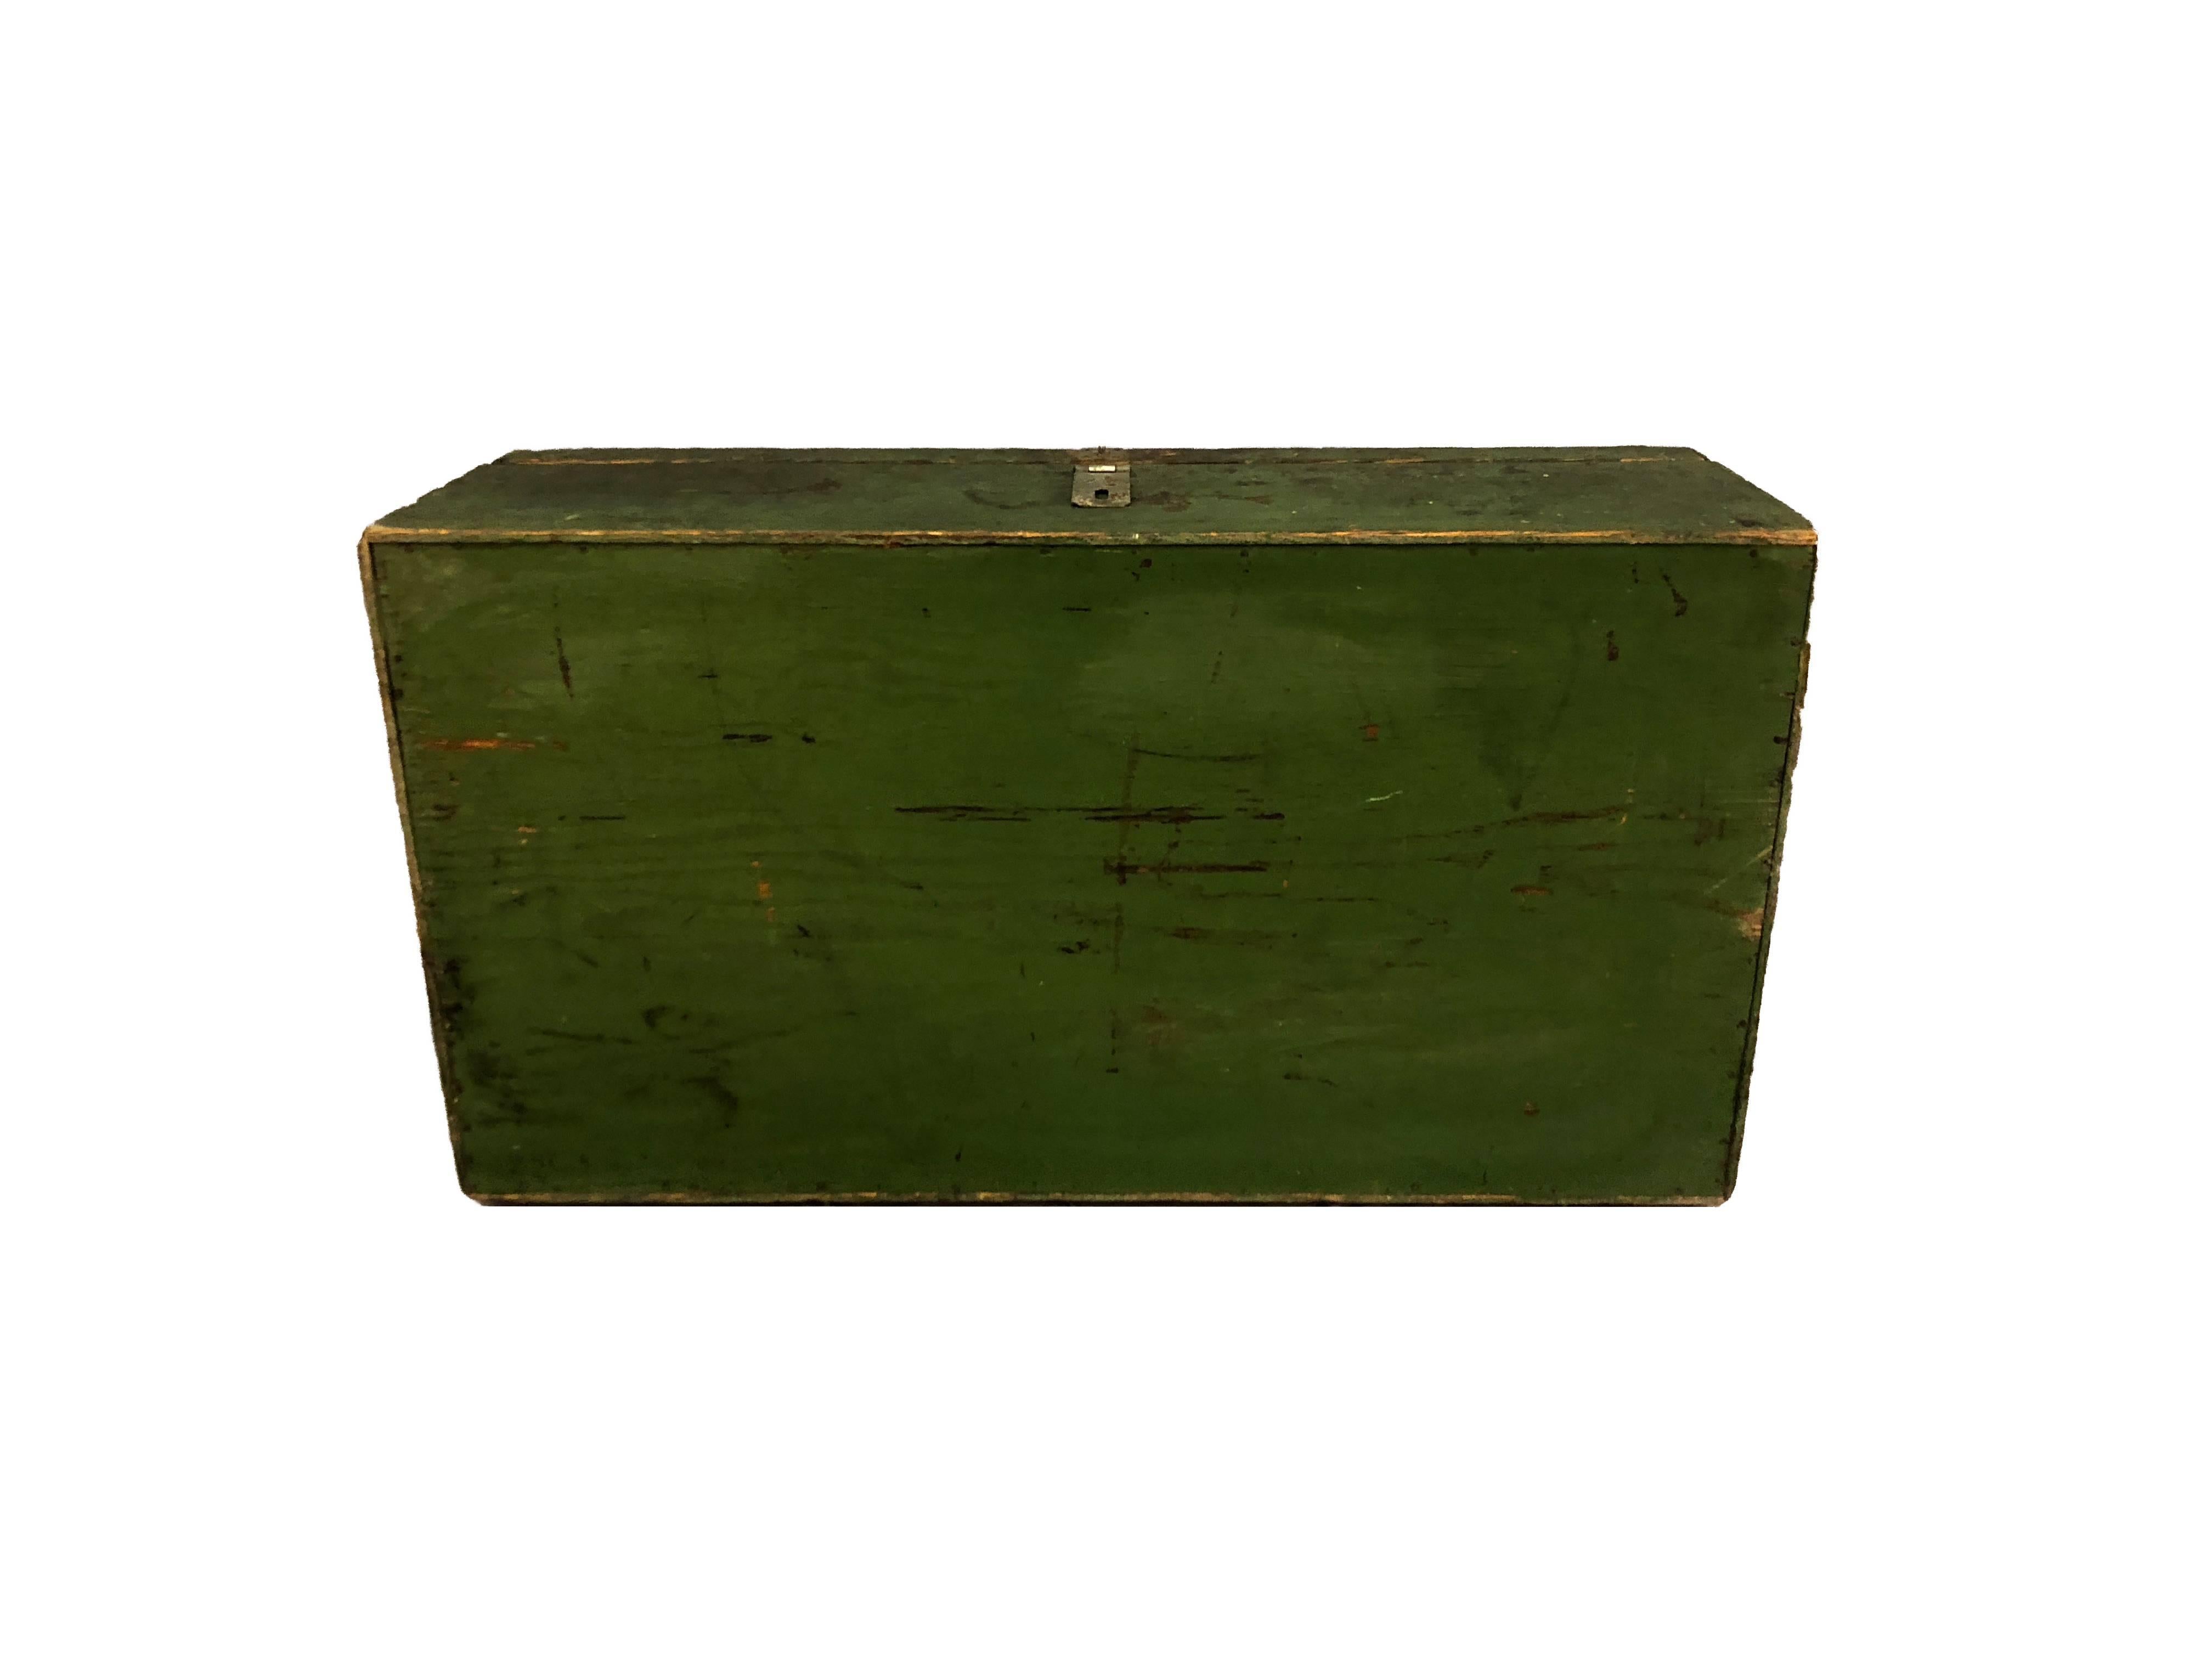 Rustic handmade rectangular green painted tool chest. The inside of the chest has drawers for storage and the exterior has iron handles. Unmarked.